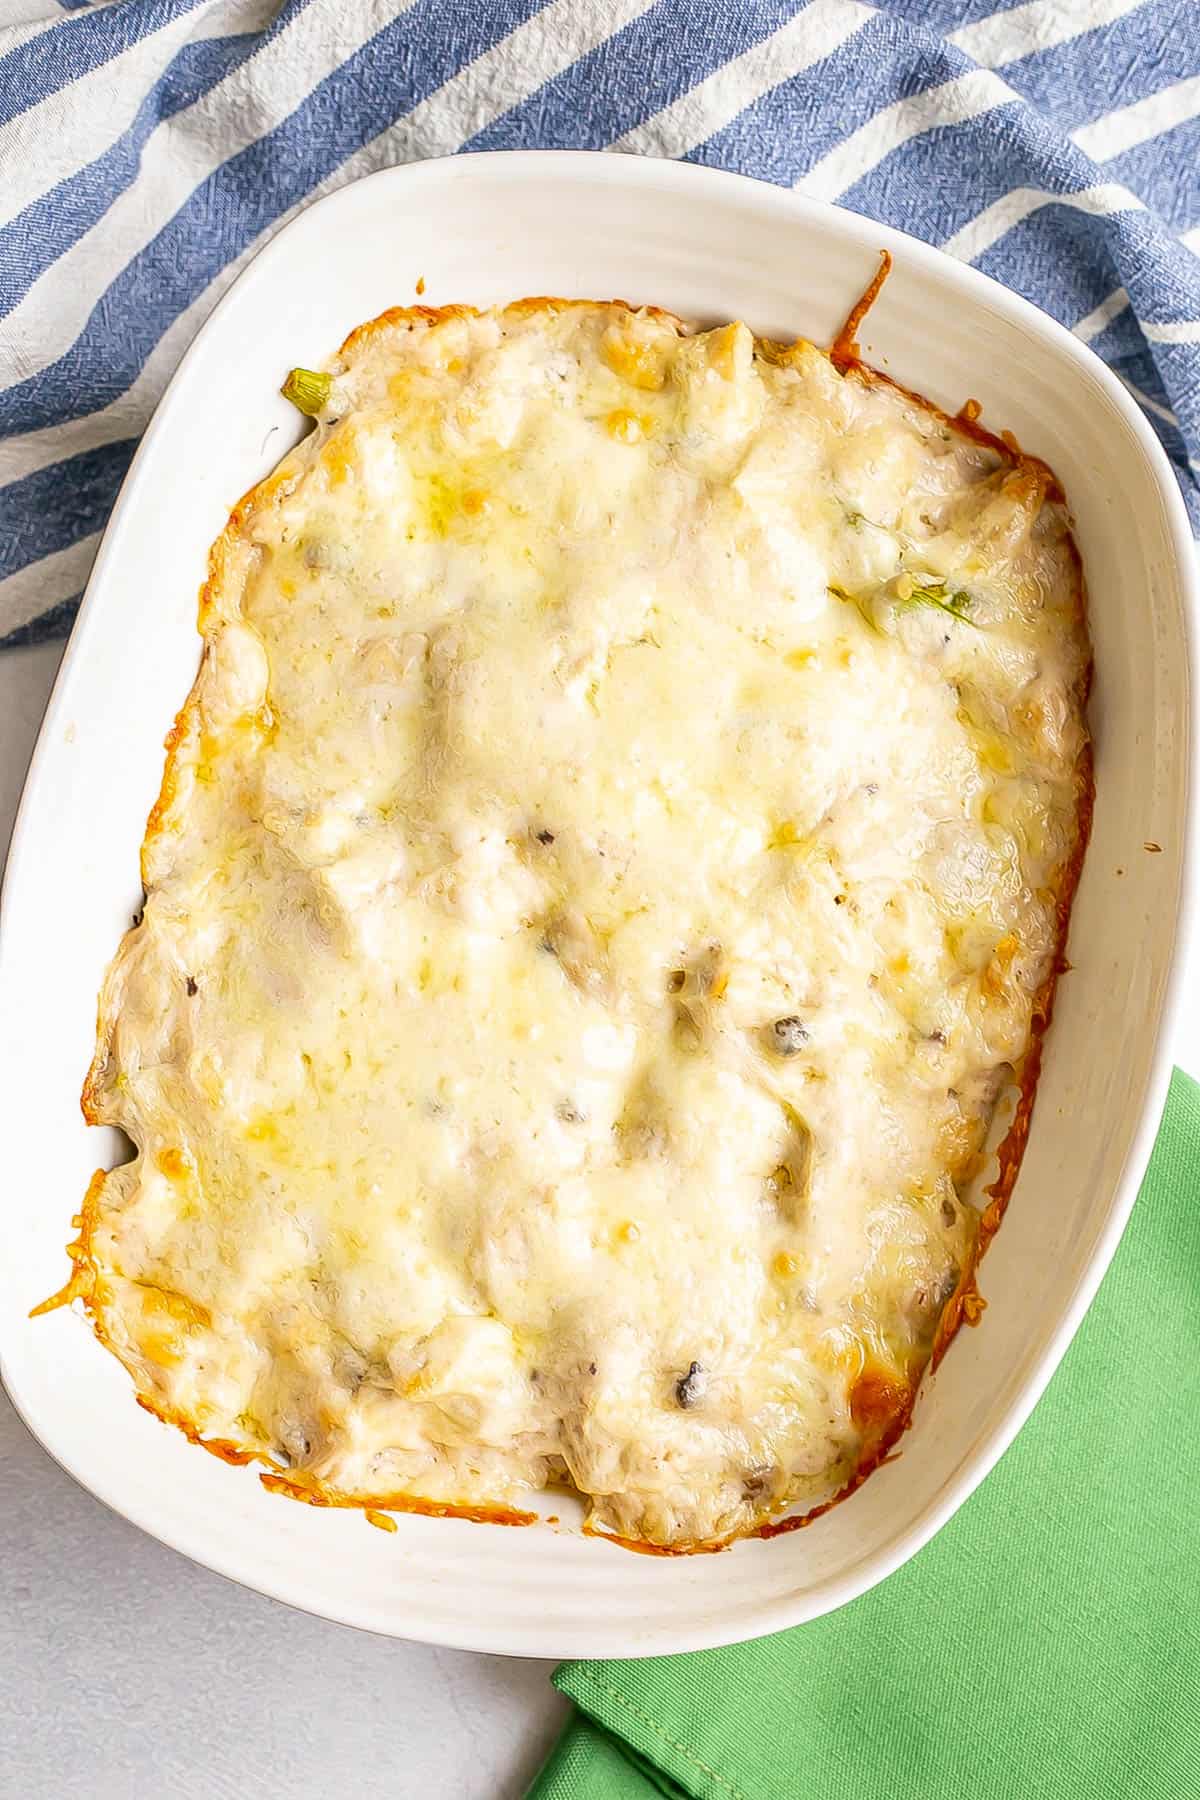 A baked chicken casserole in a rectangular white dish with a layer of melted cheese on top.